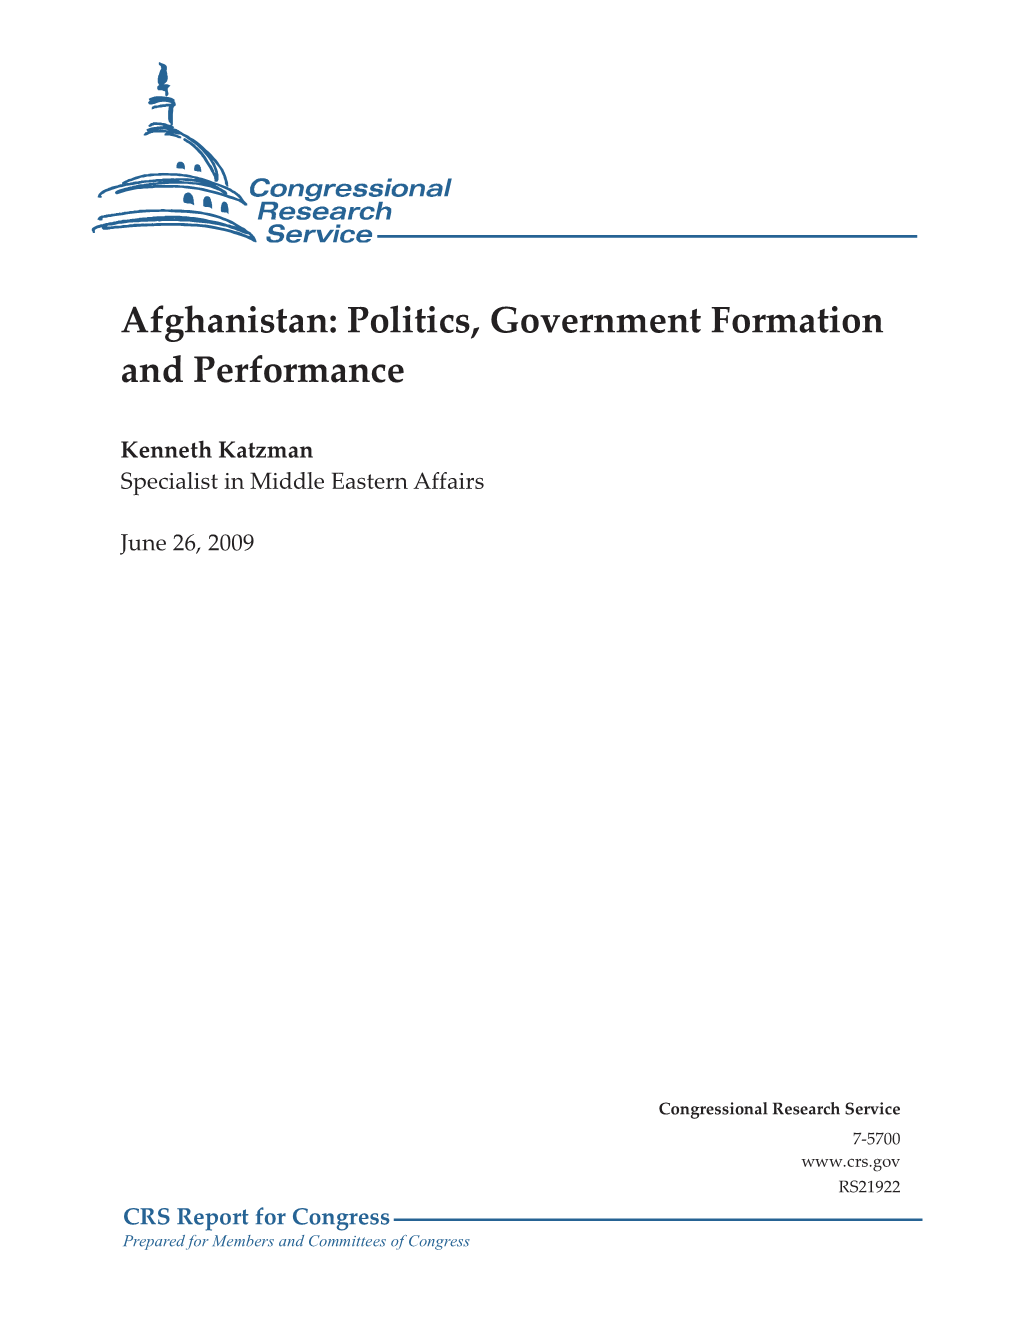 Afghanistan: Politics, Government Formation and Performance